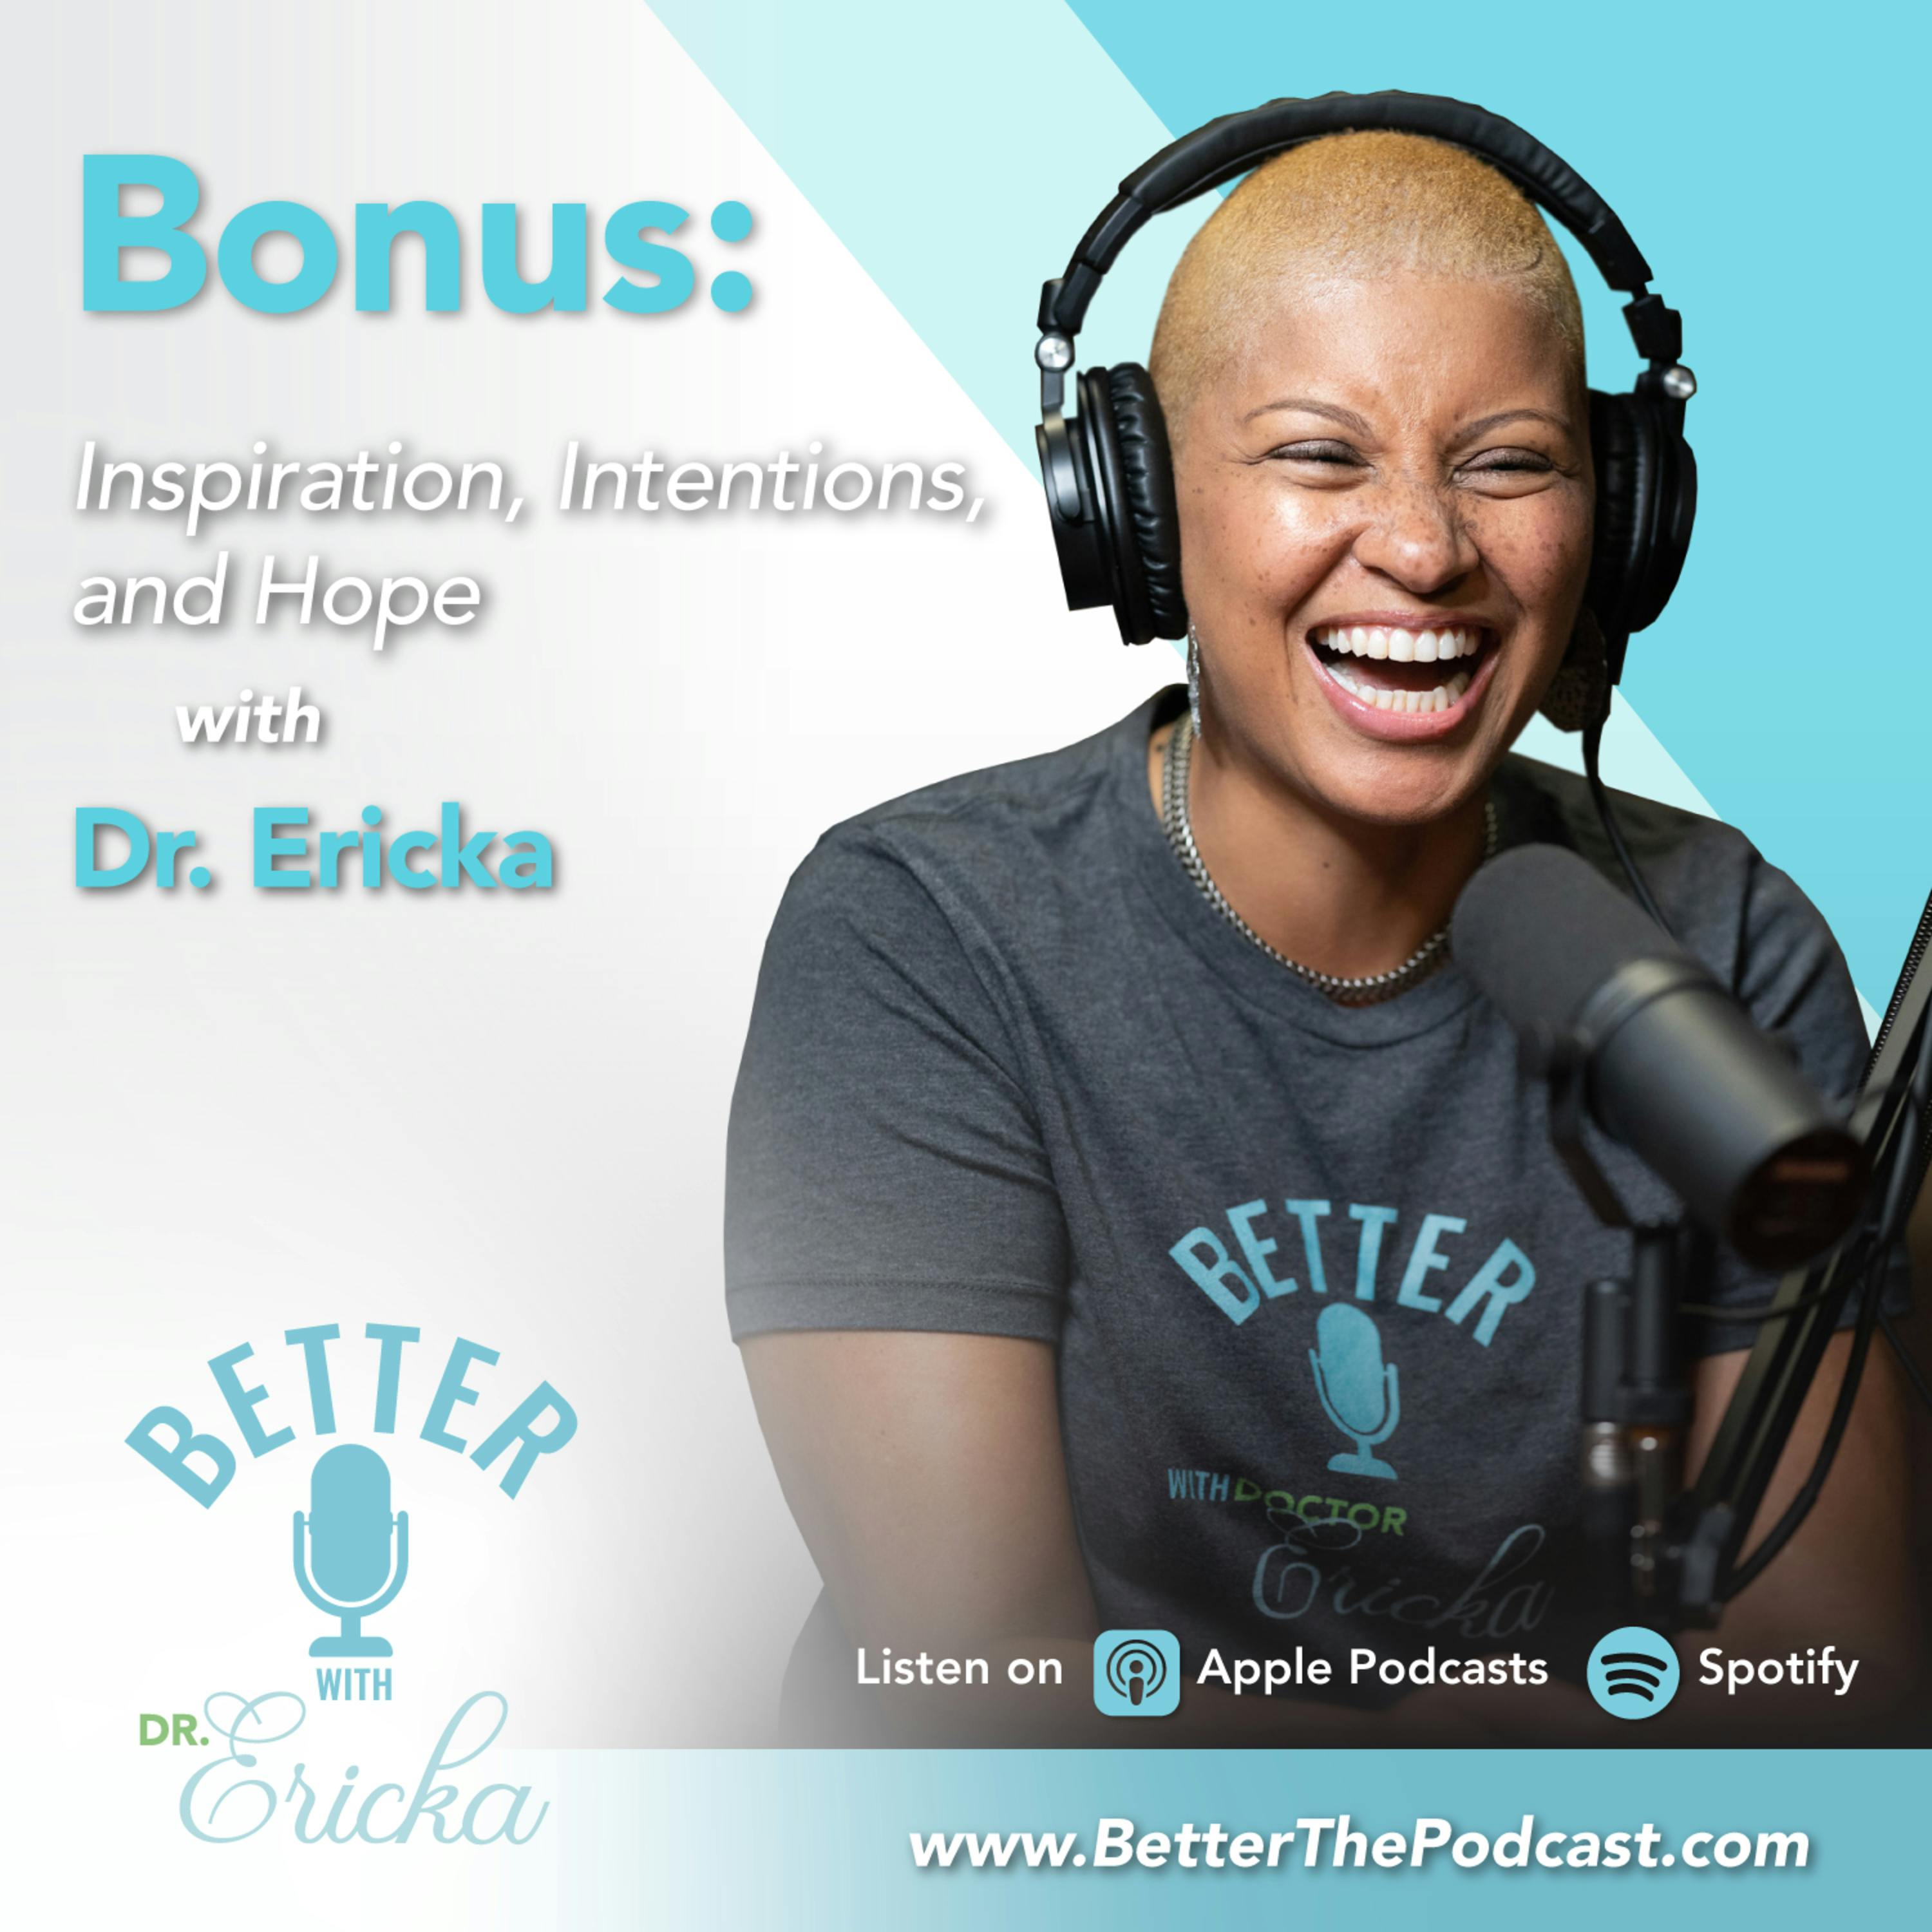 Inspiration, Intentions, and Hope with Dr. Ericka